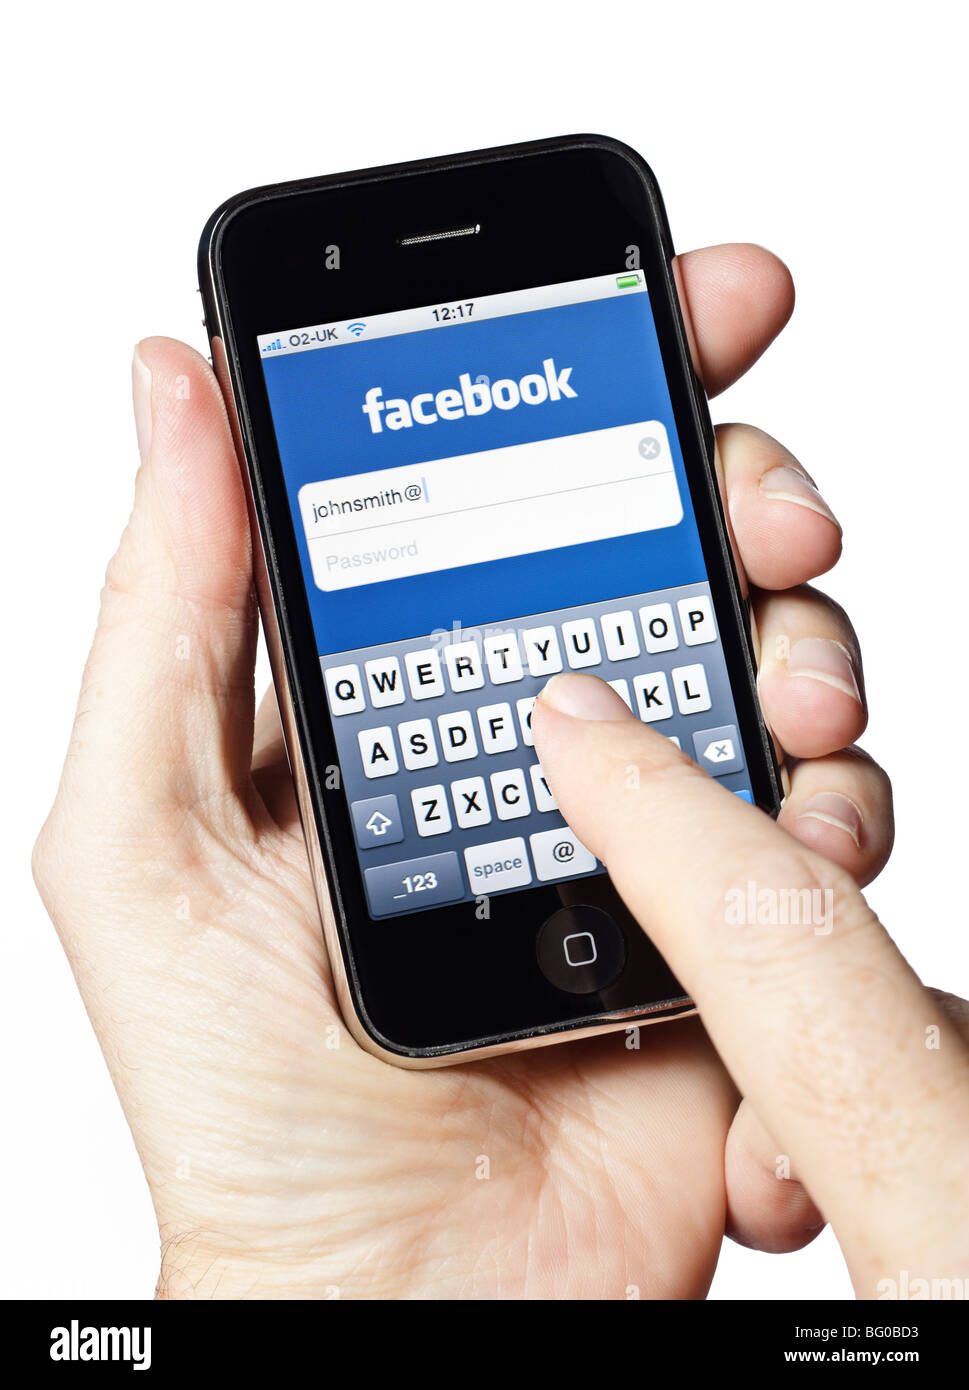 Facebook app - Male hand holding iPhone smartphone smart phone mobile phone using Facebook Stock Photo